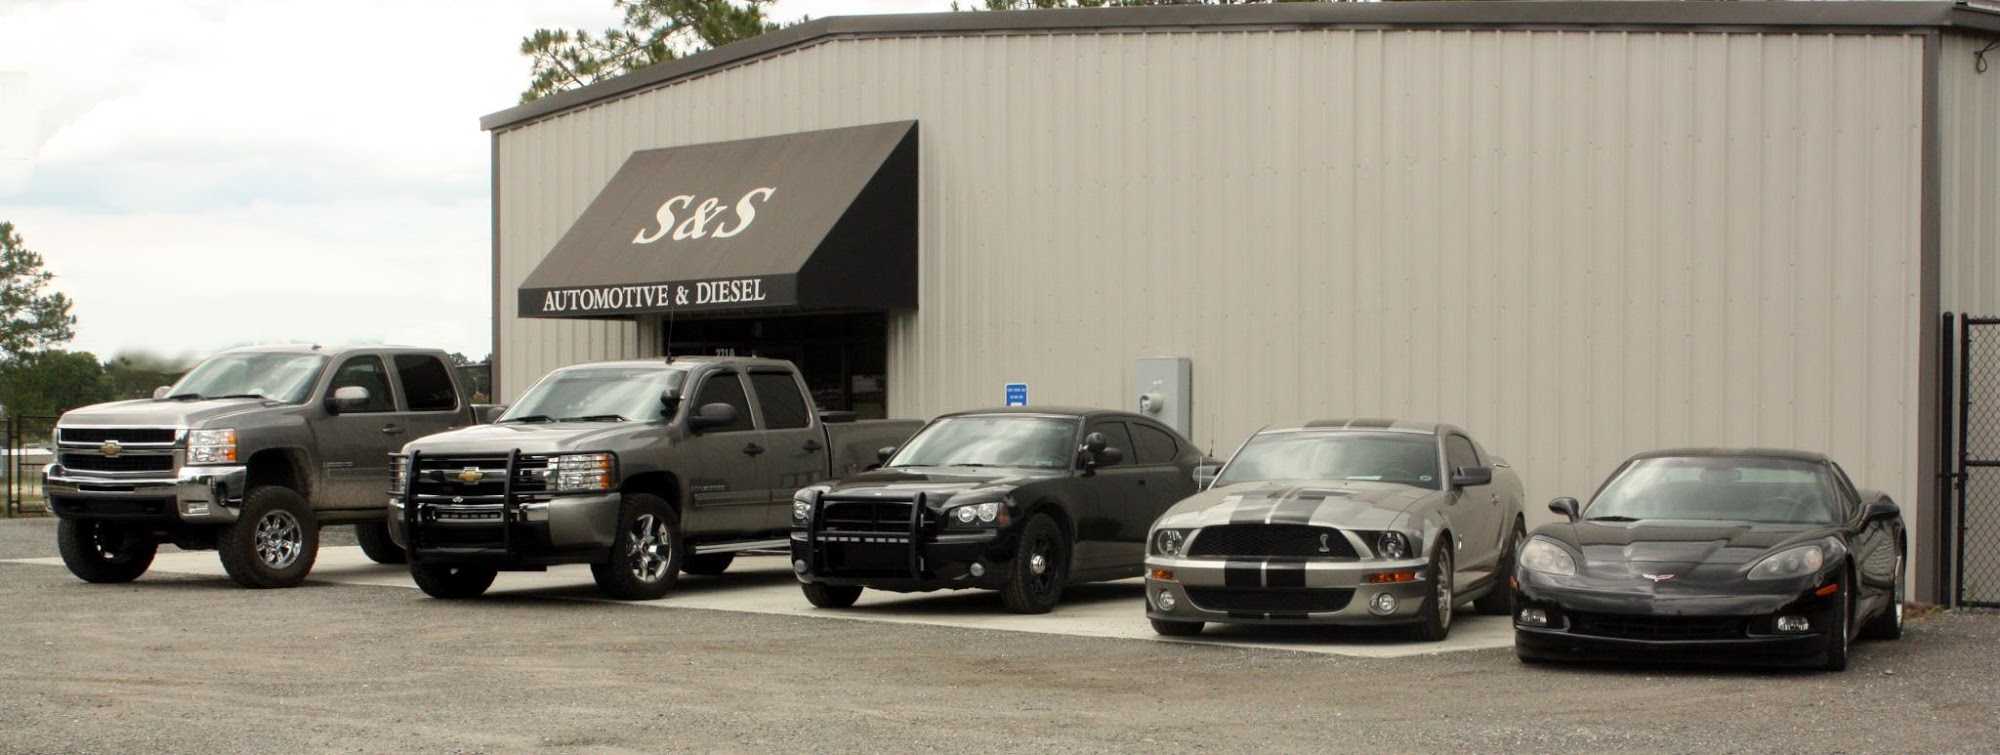 S&S Automotive and Diesel Service, Inc.